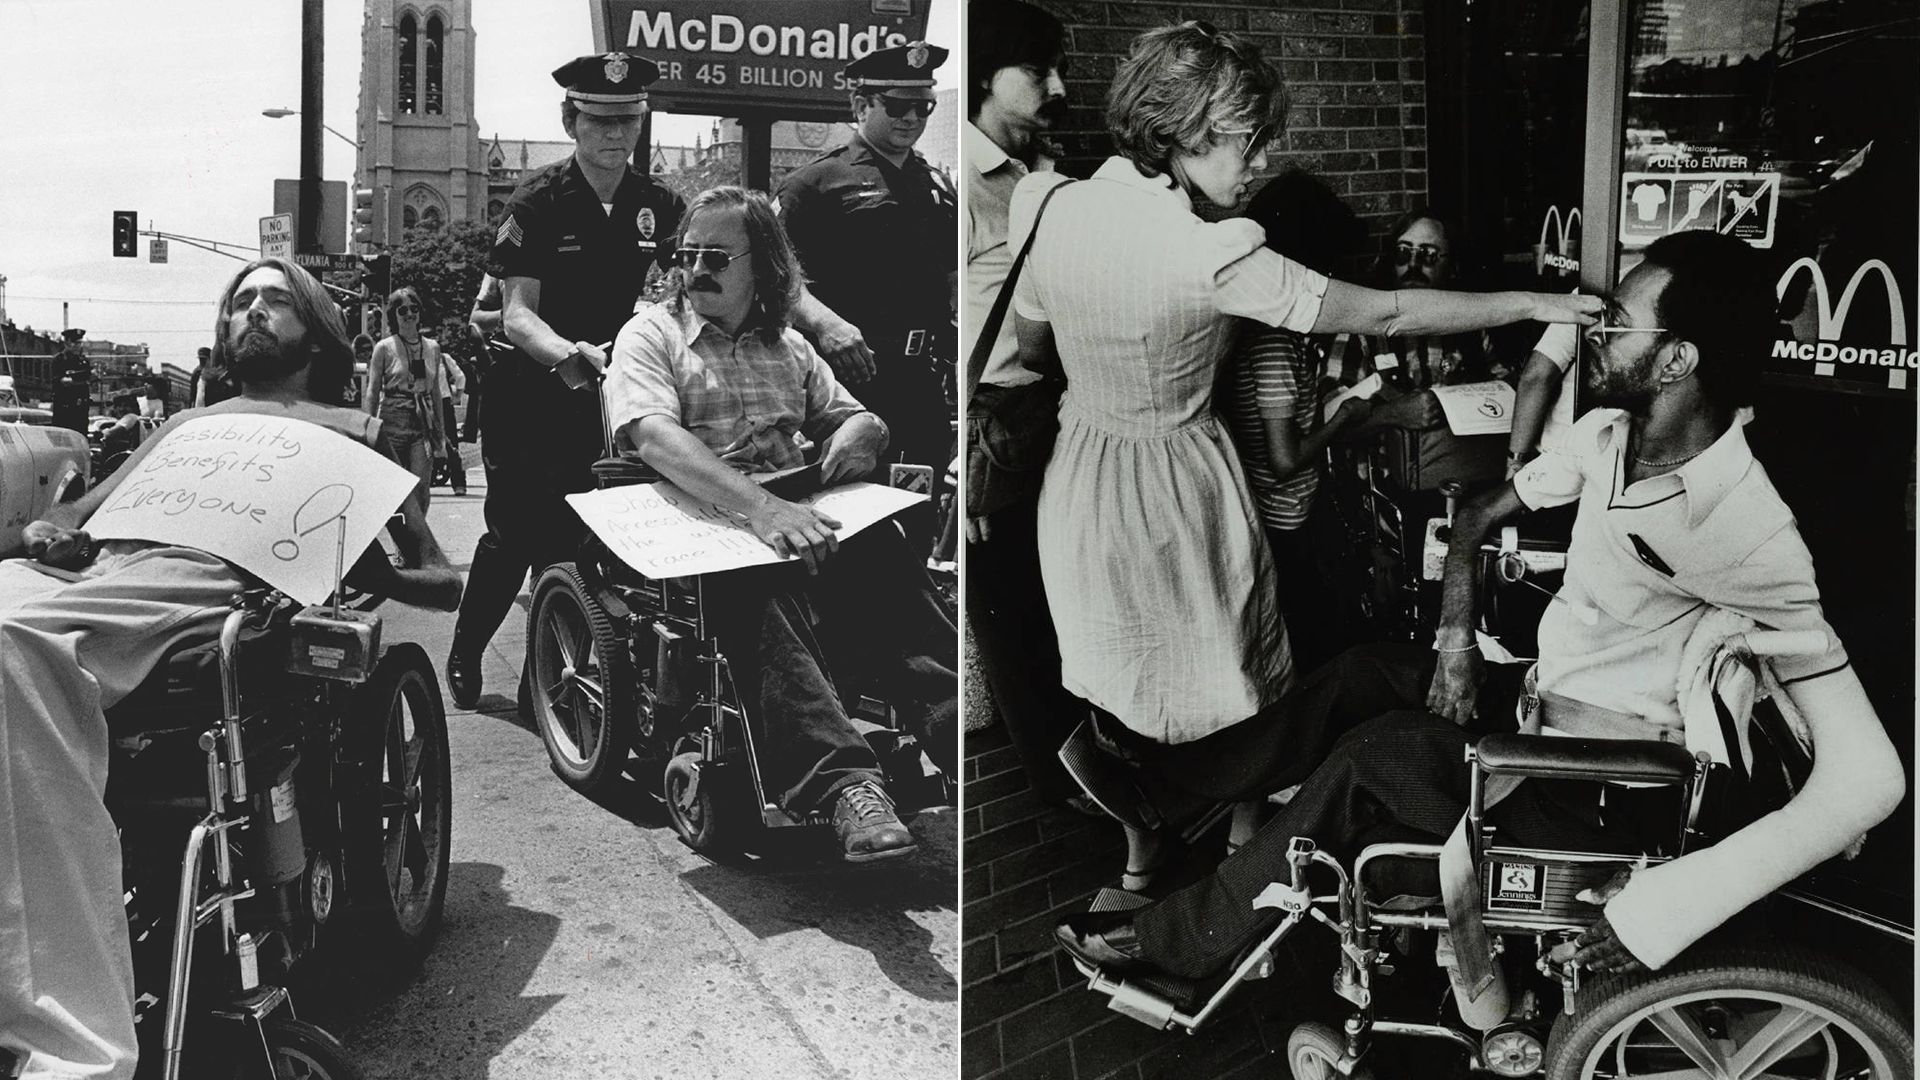 People in wheelchairs protest outside a McDonald's restaurant.